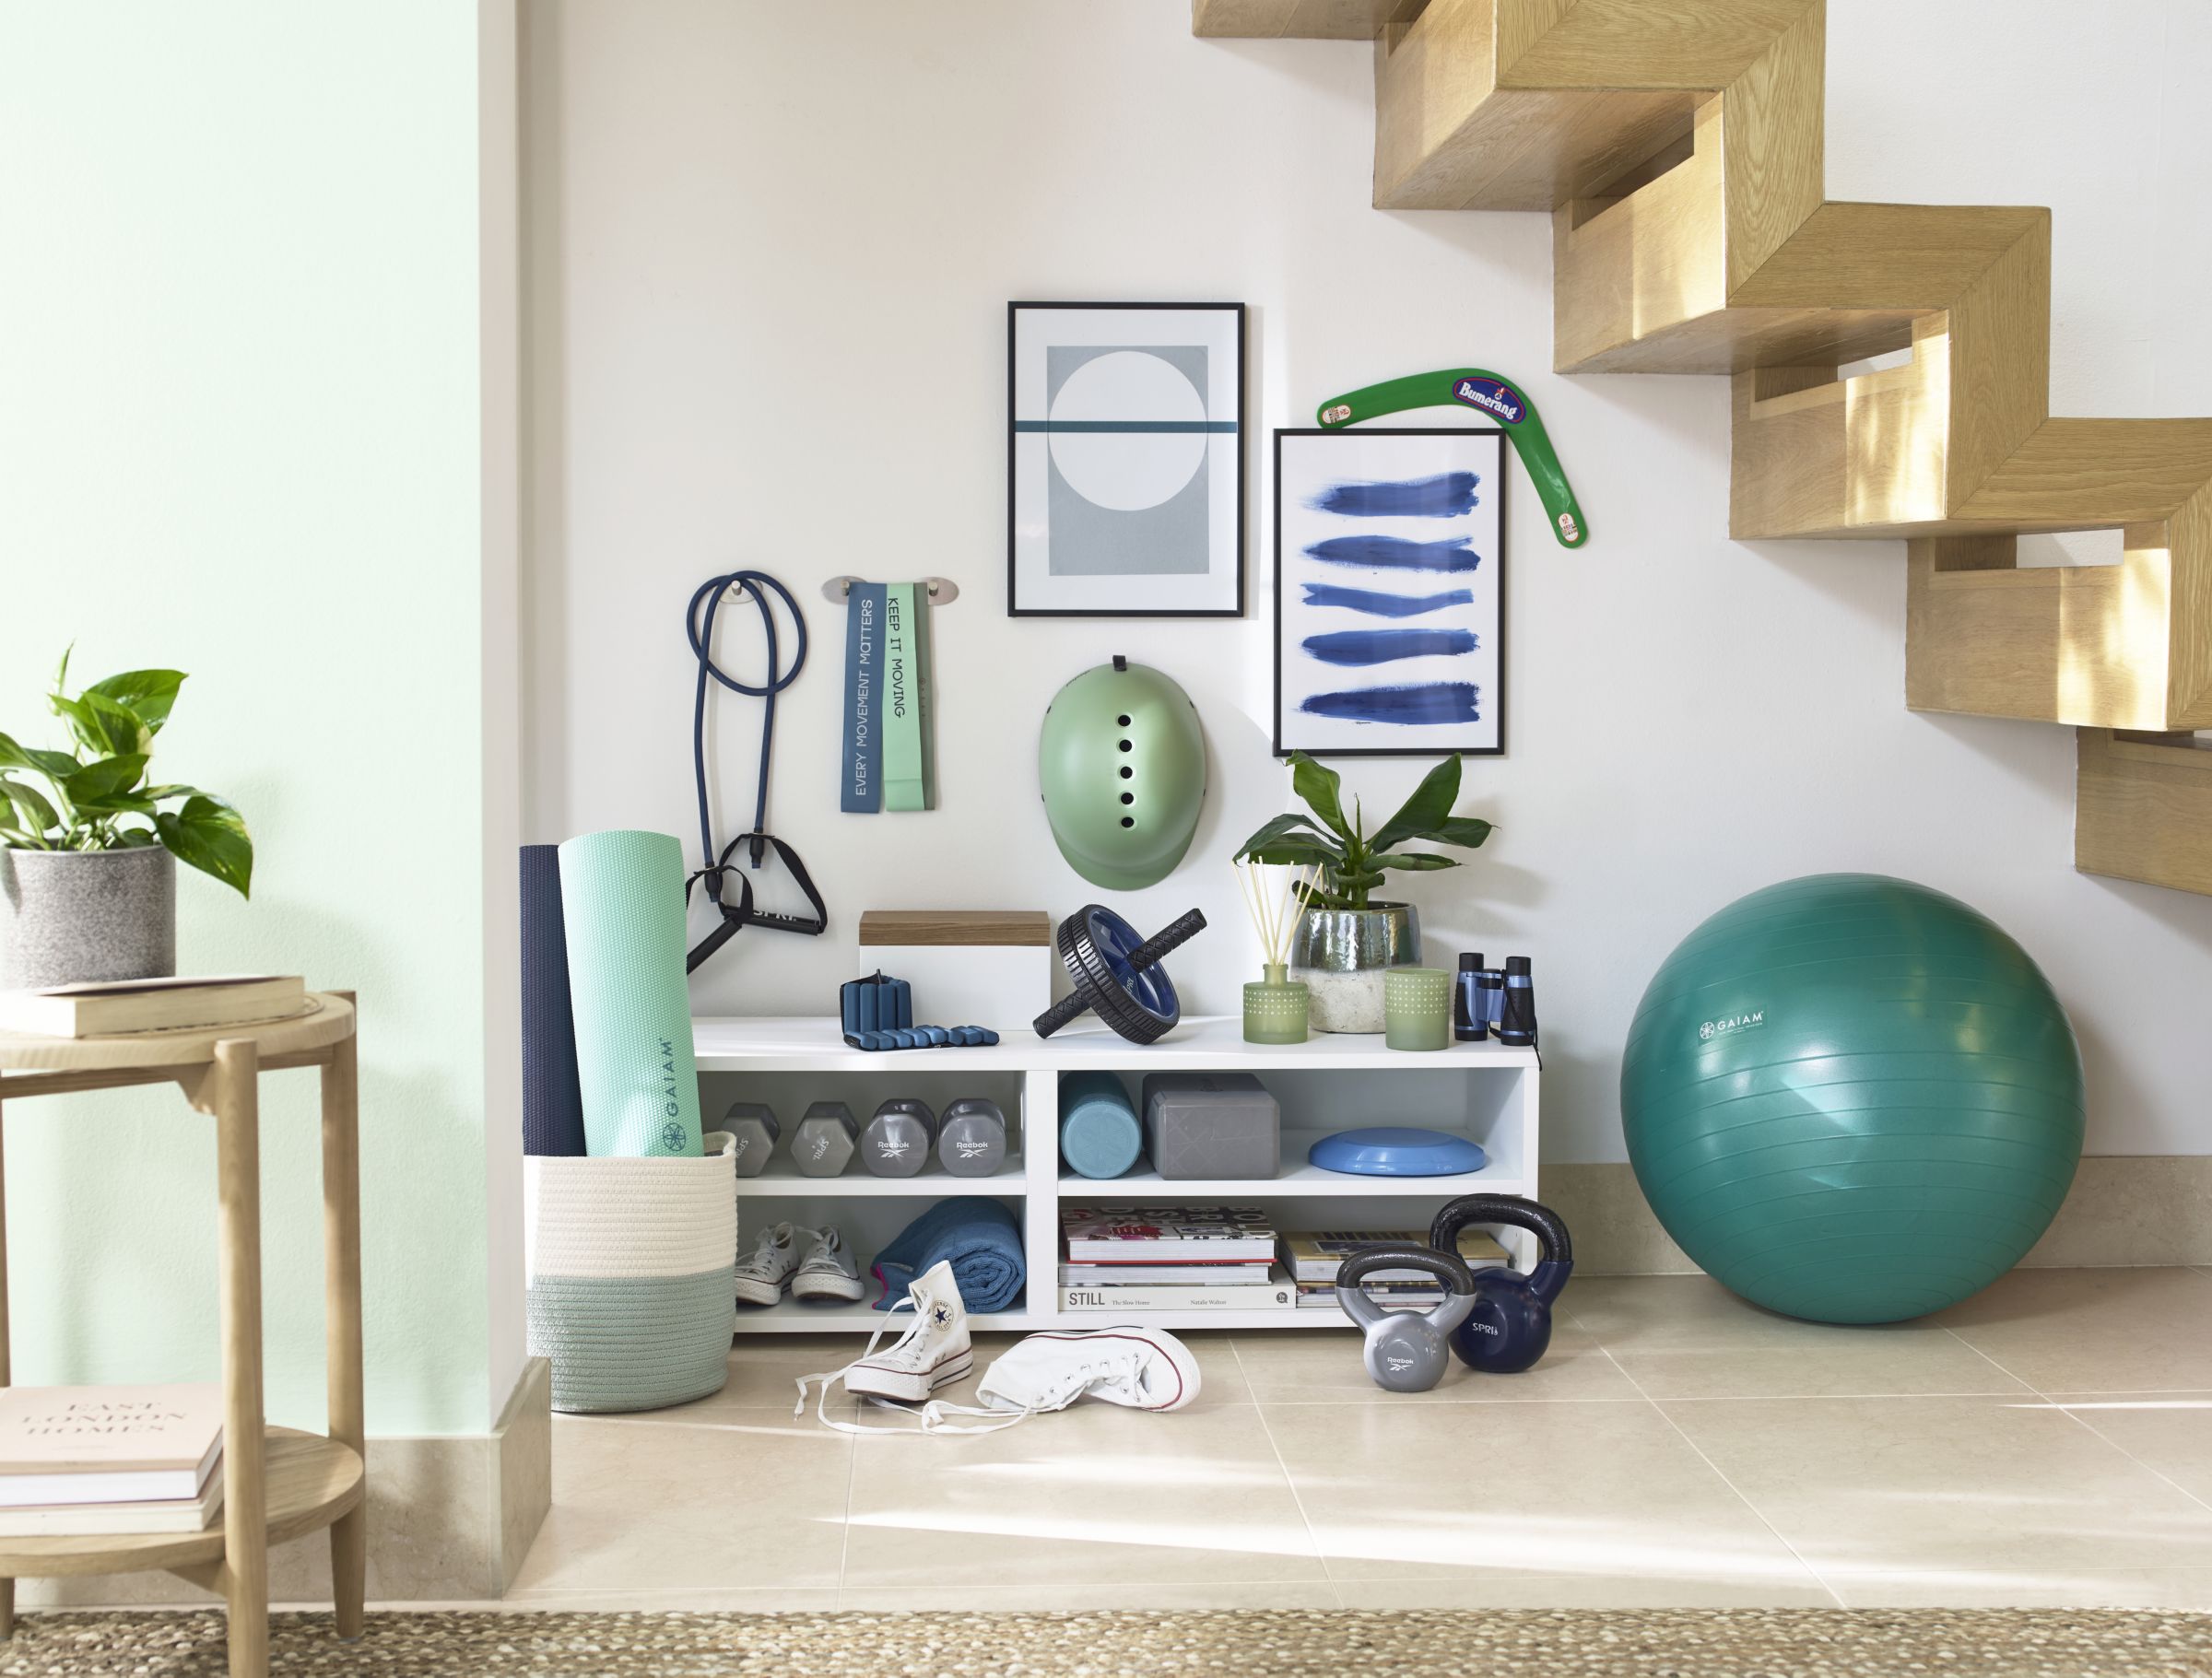 How to create a gym at home